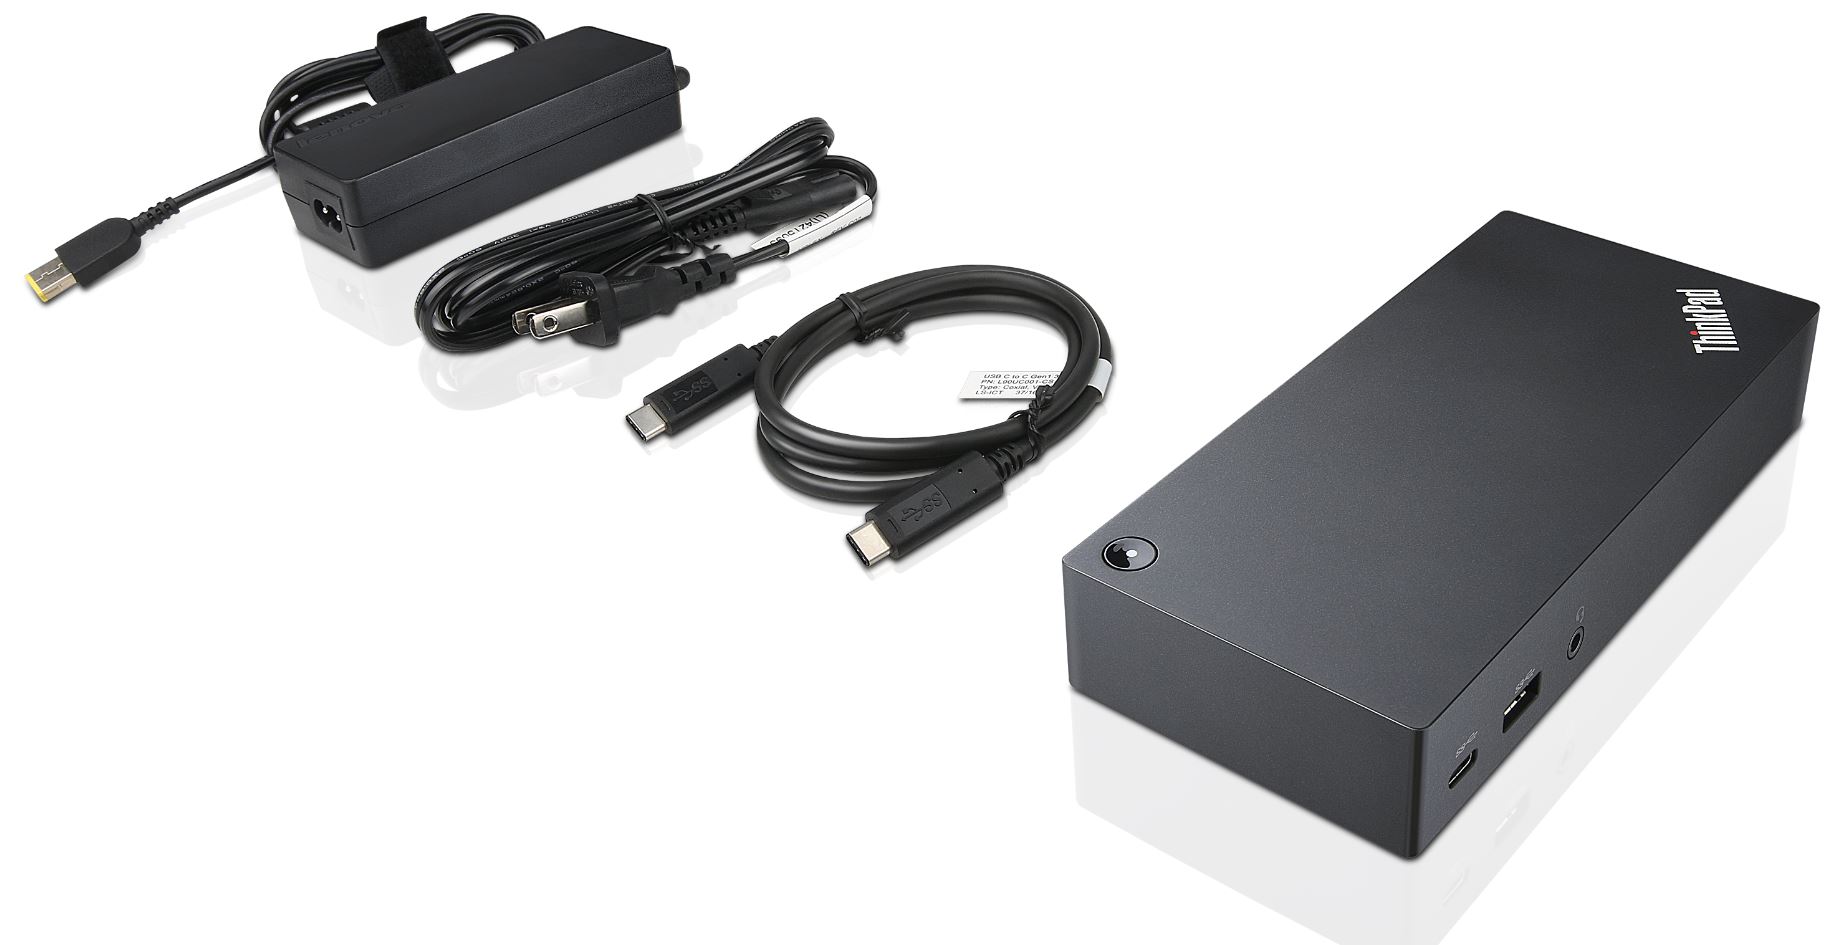 ThinkPad USB-C Dock - Overview and Service Parts - Lenovo Support US